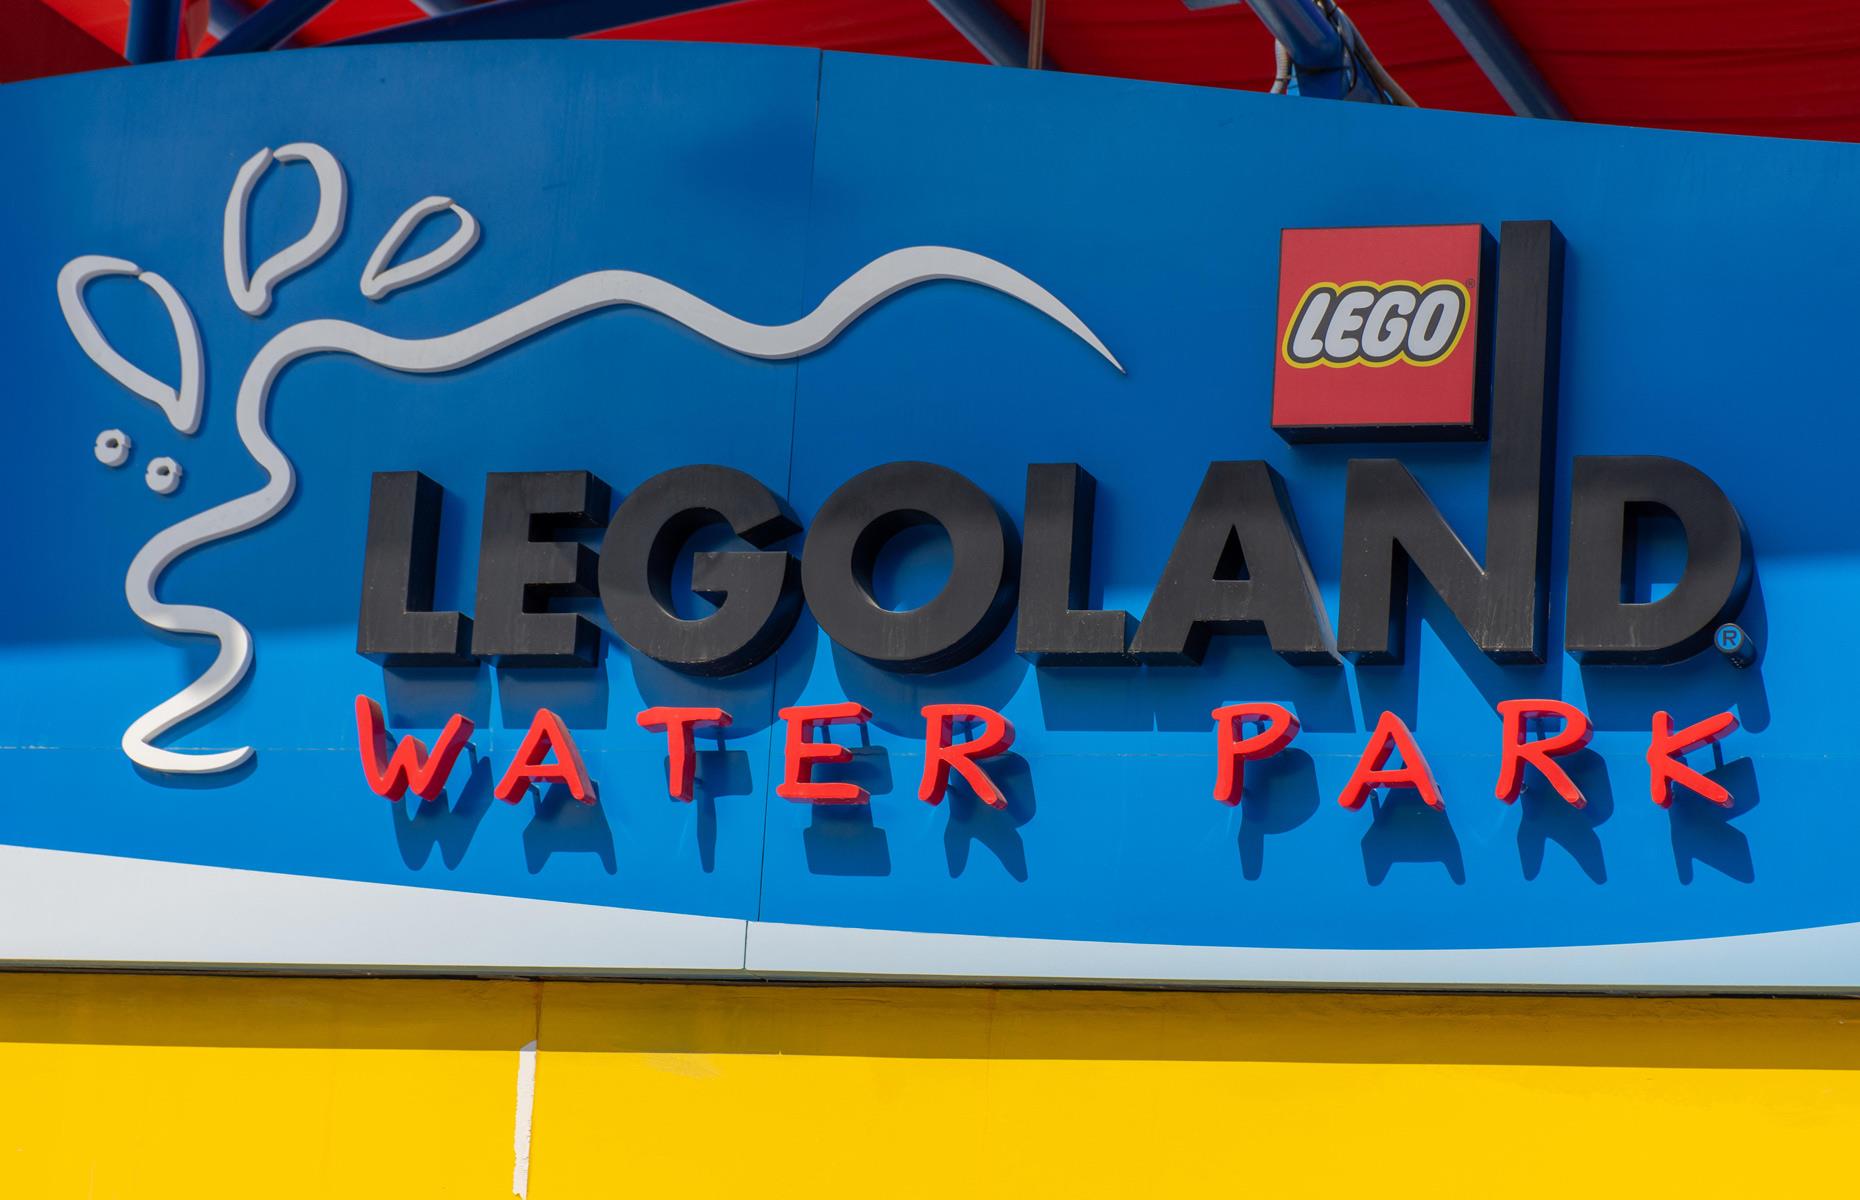 <p>Designed specifically for youngsters aged two to 12, LEGOLAND Water Park opened in 2016 and was an instant hit with families. Older kids can get creative and build a raft of LEGO, then sail it down the Build A Raft River and get drenched in the Joker Soaker, a 300-gallon play house featuring slides and waterwheels. For younger kids, the DUPLO Splash Safari offers pint-sized water slides, plus the chance to swim with elephants and crocodiles (plastic, of course). </p>